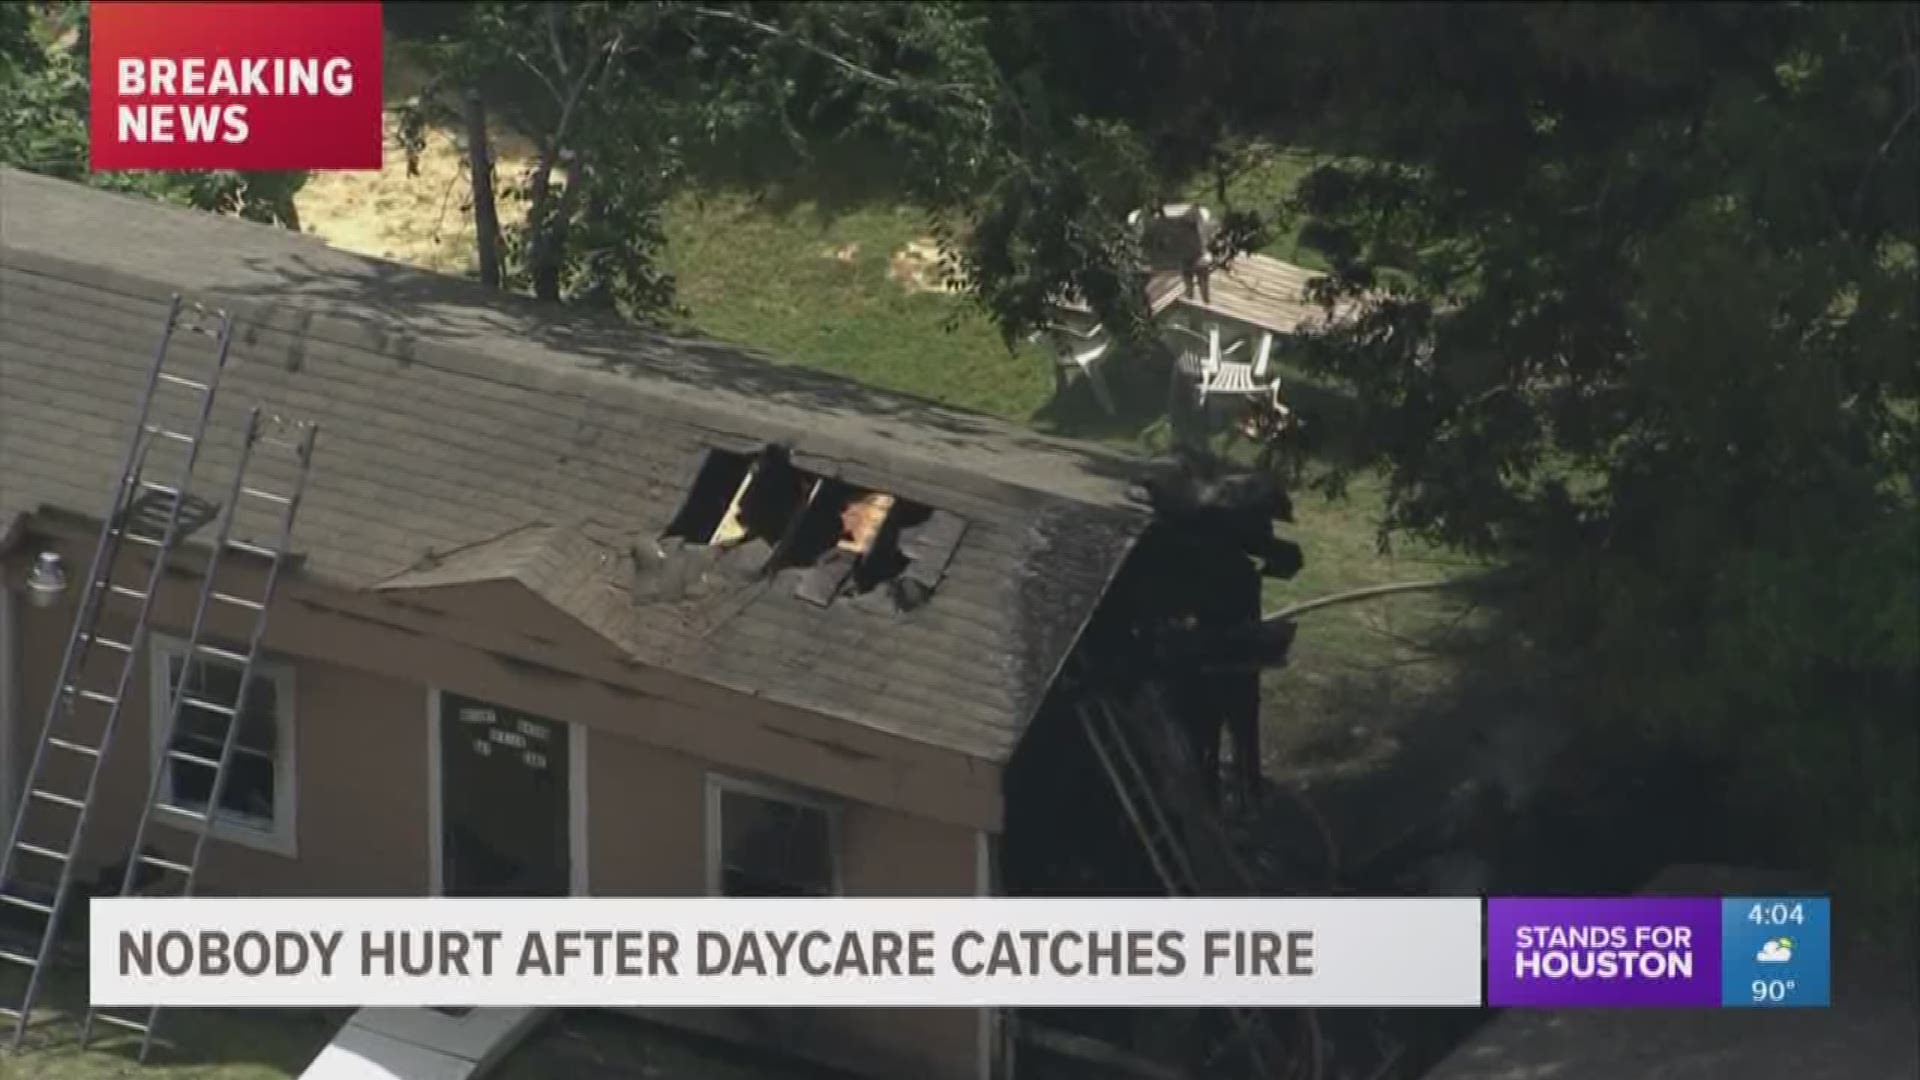 A day care caught fire Tuesday afternoon in southeast Houston. Officials say the fire broke out in an office, and no one was injured.